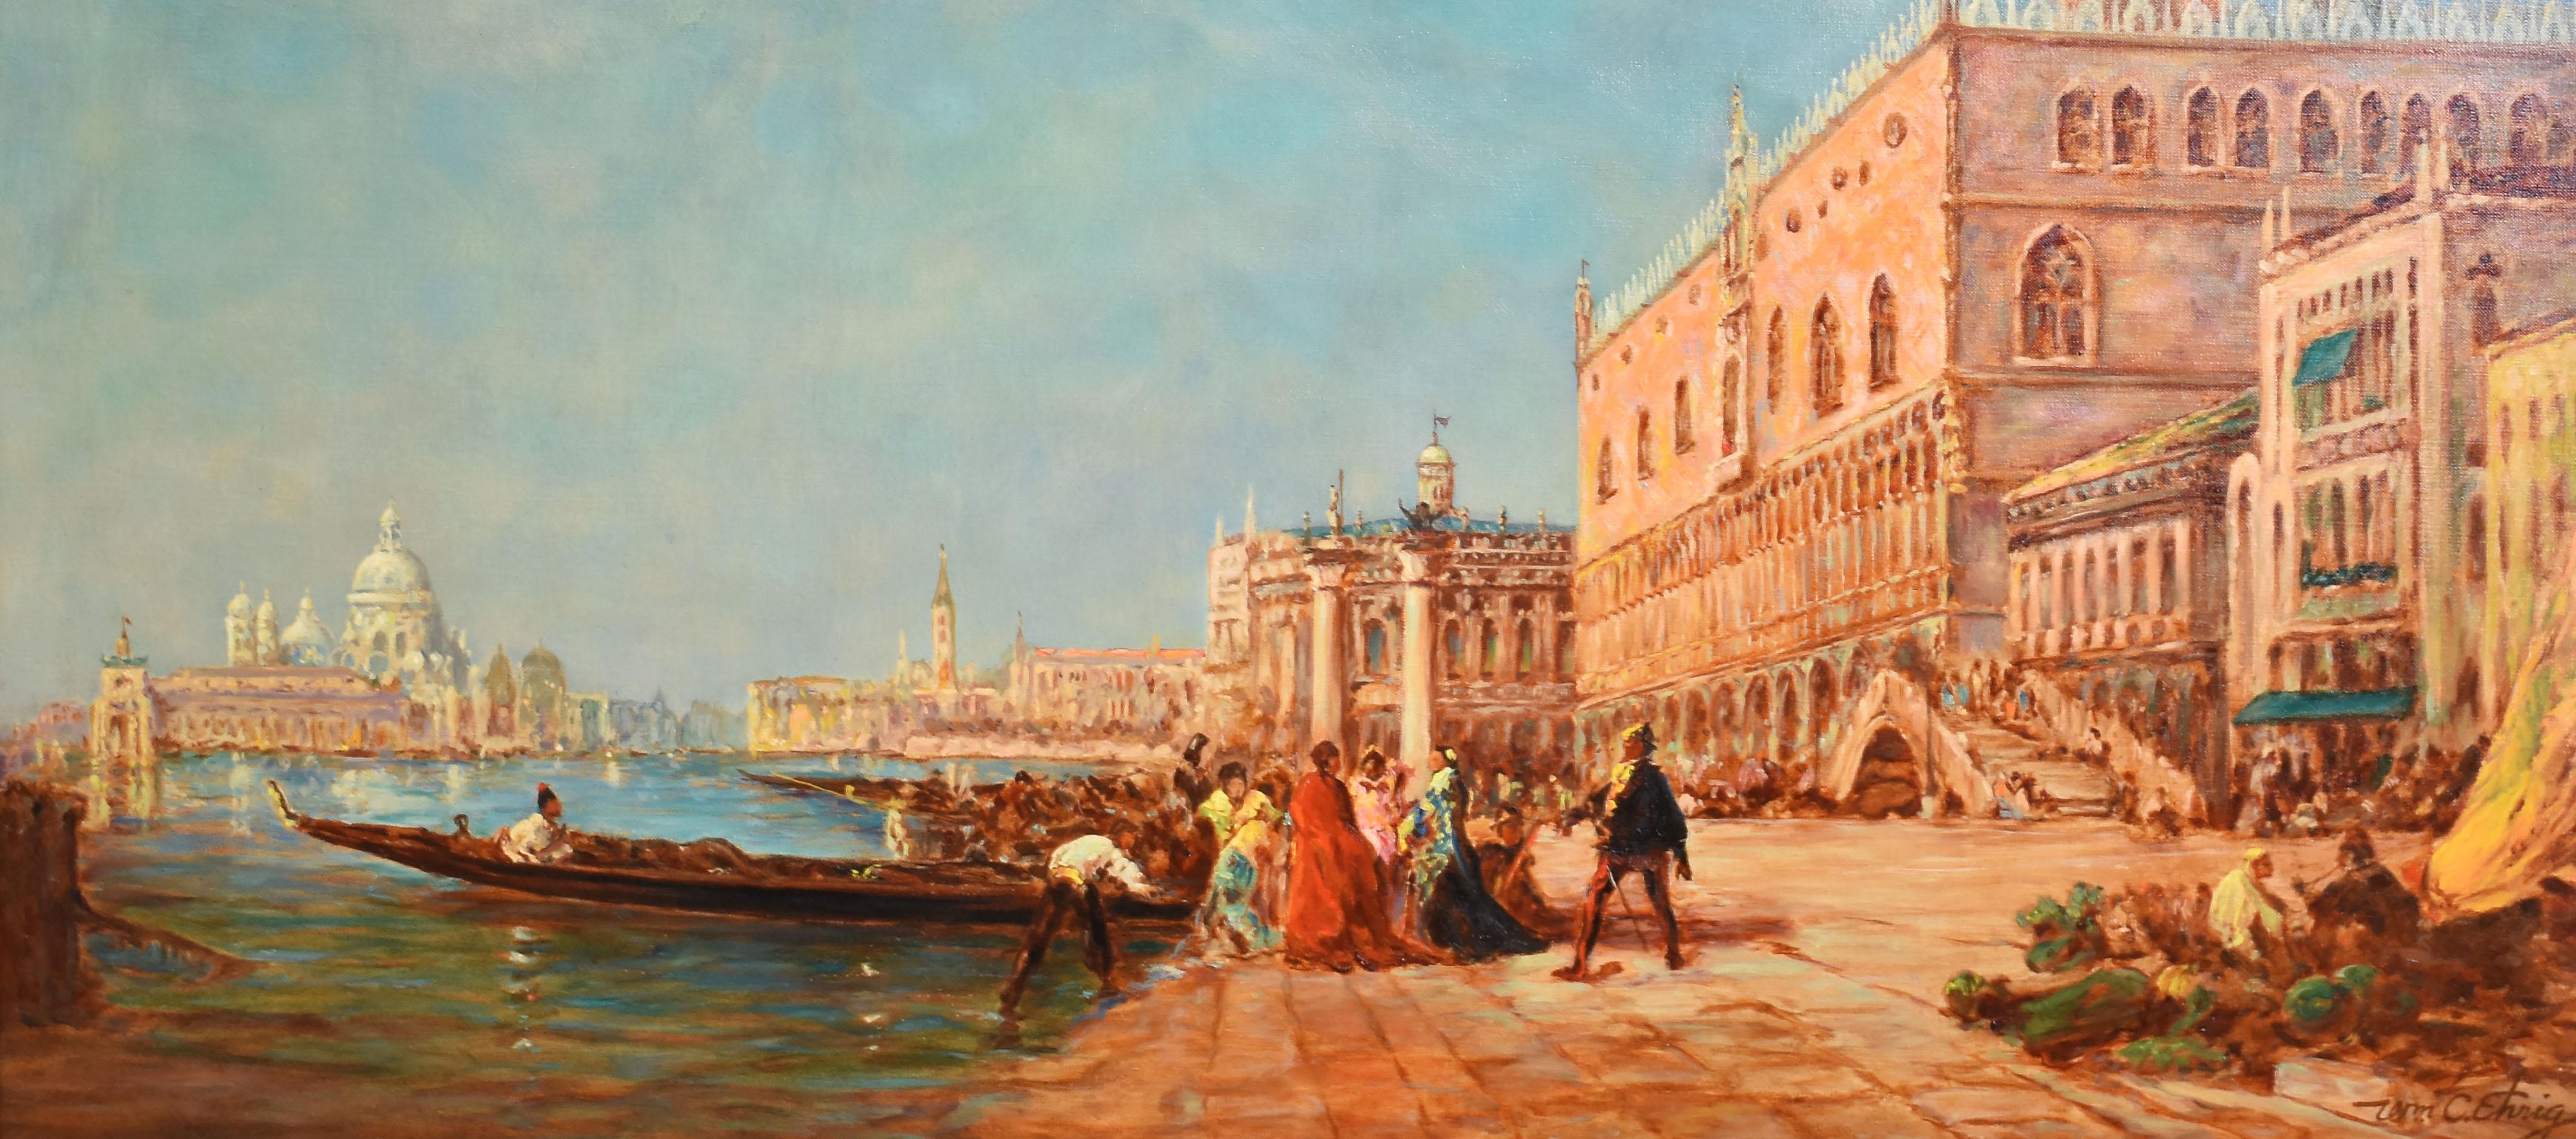 William Ehrig Signed Antique Large Impressionist Oil Painting of Venice Italy 2